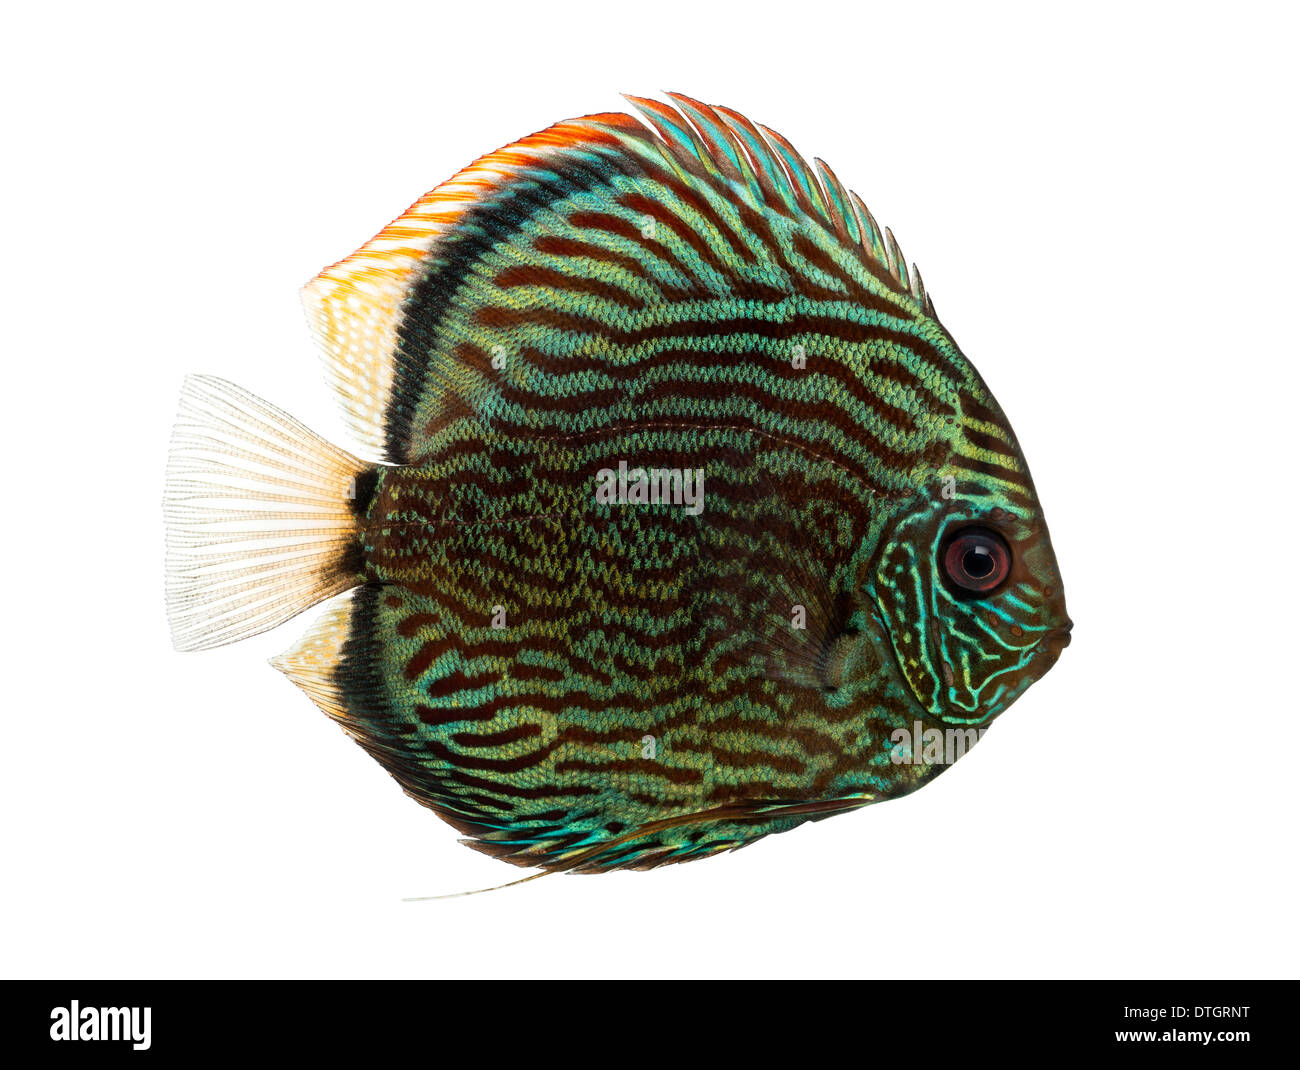 Side view of a Blue snakeskin discus, Symphysodon aequifasciatus, against white background Stock Photo